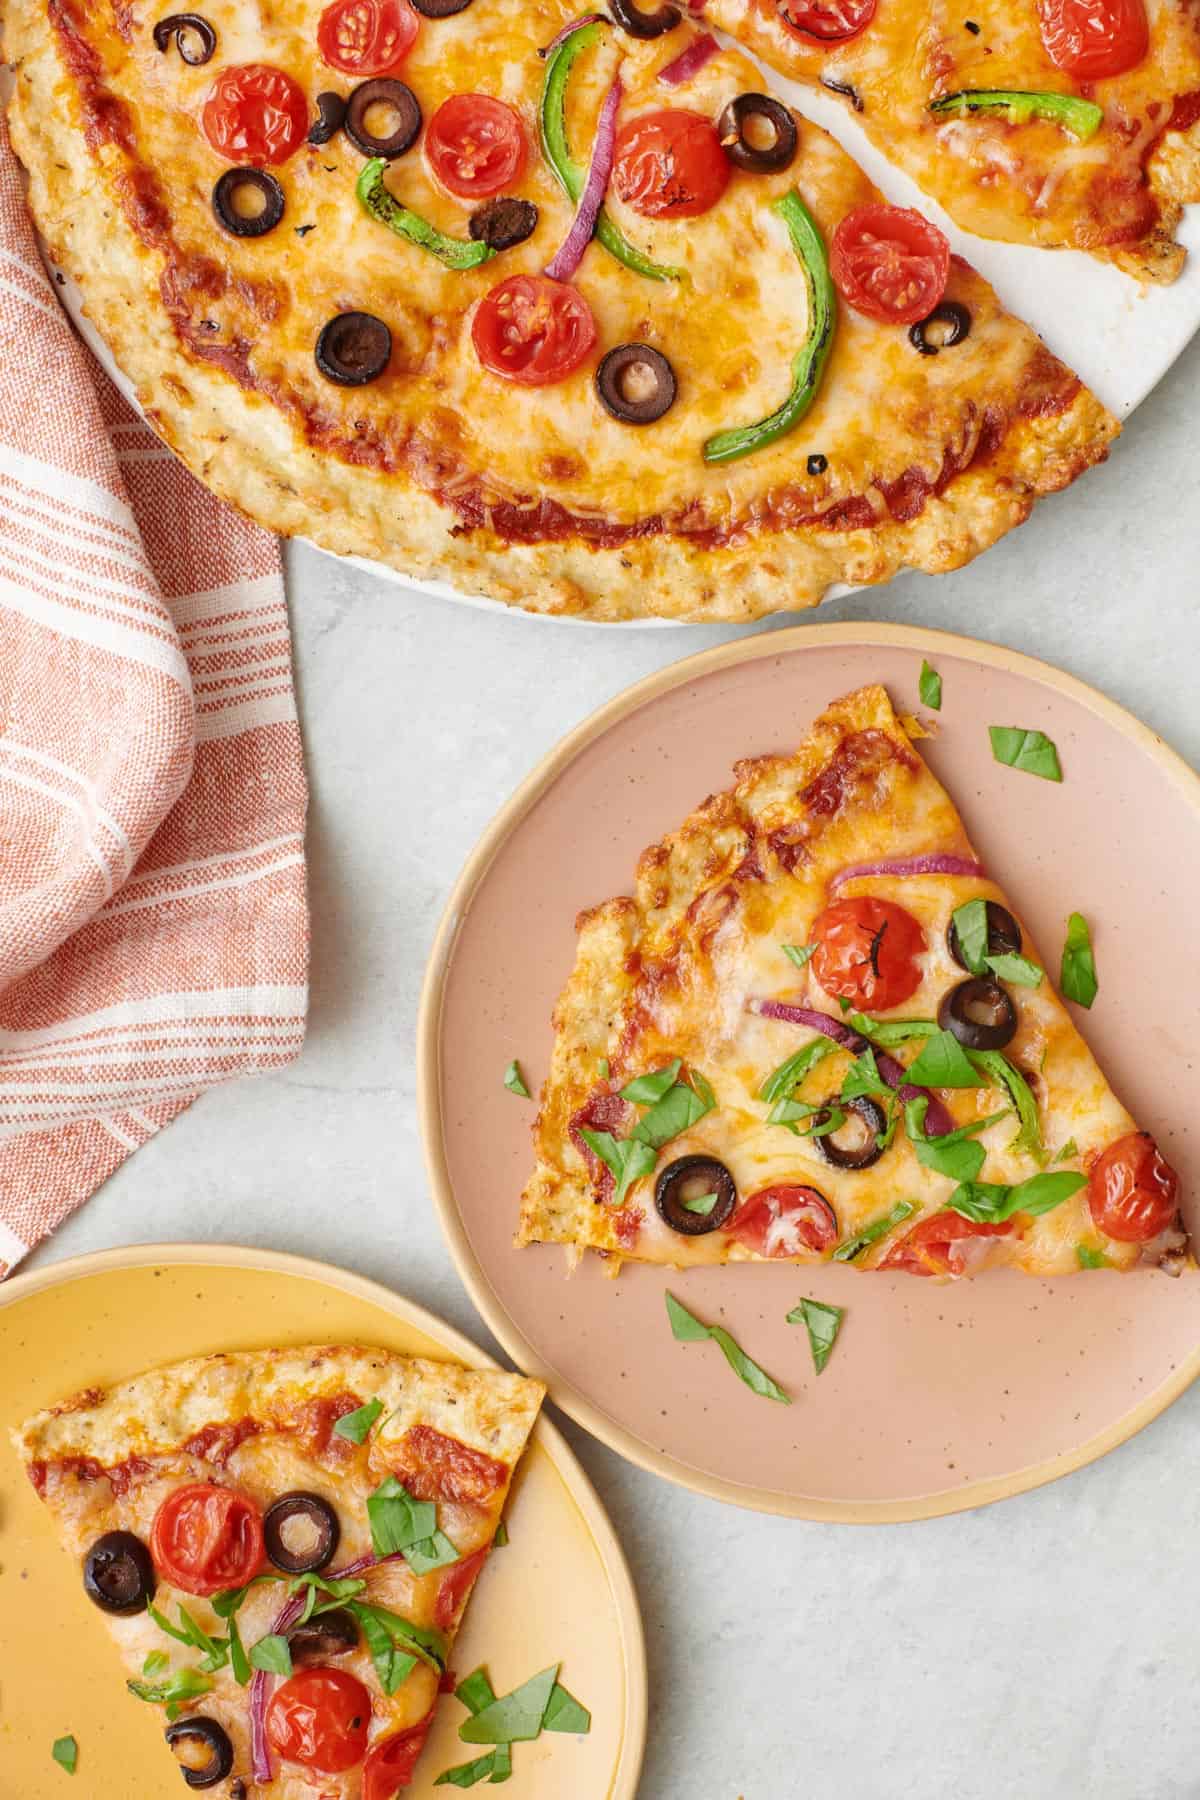 slices of chicken crust pizza on small plates topped with fresh chopped basil and sliced olives - one of the recipes for this week's healthy weekly meal plan